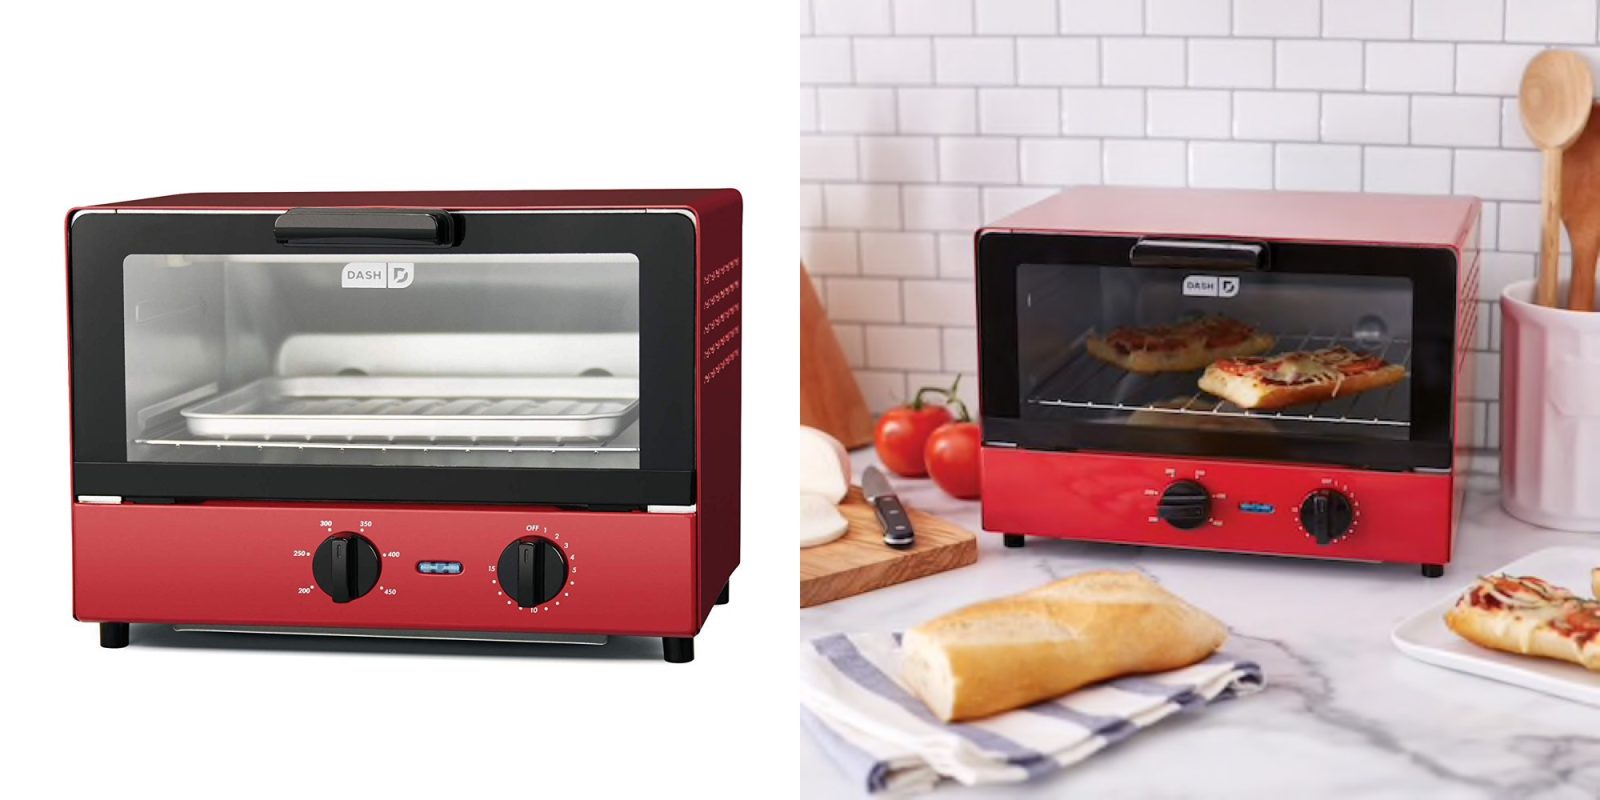 Dash's Compact Toaster Oven is available at Amazon for a low of 17